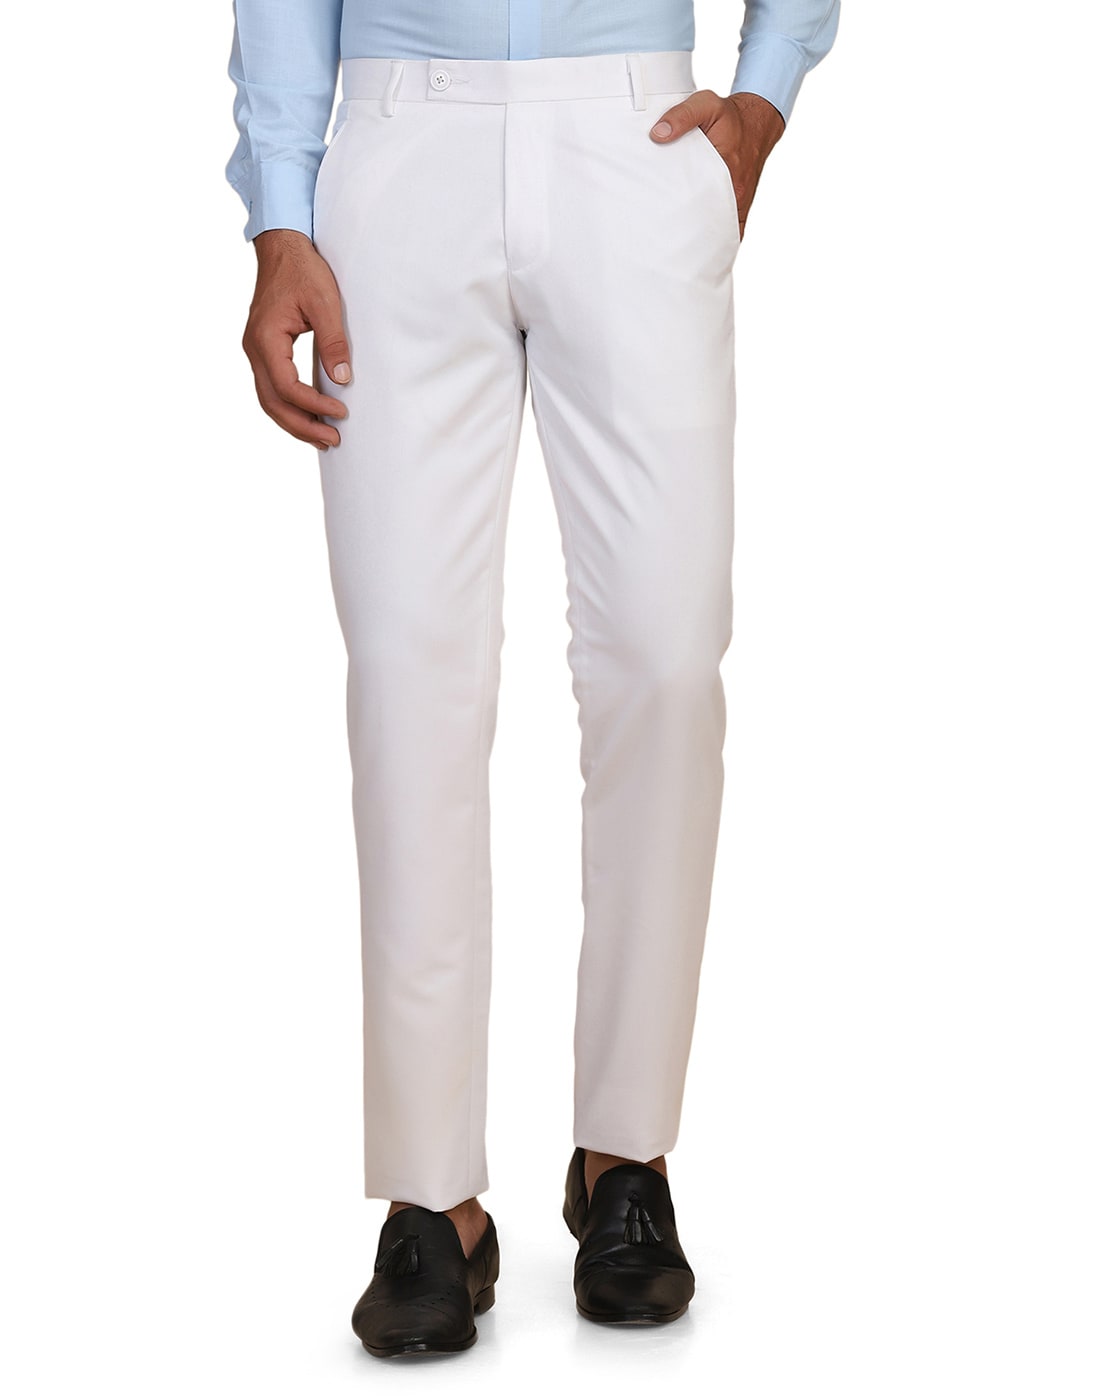 fcity.in - Srey White And Black Combo Slim Fit Formal Trouser For Men /  Stylish